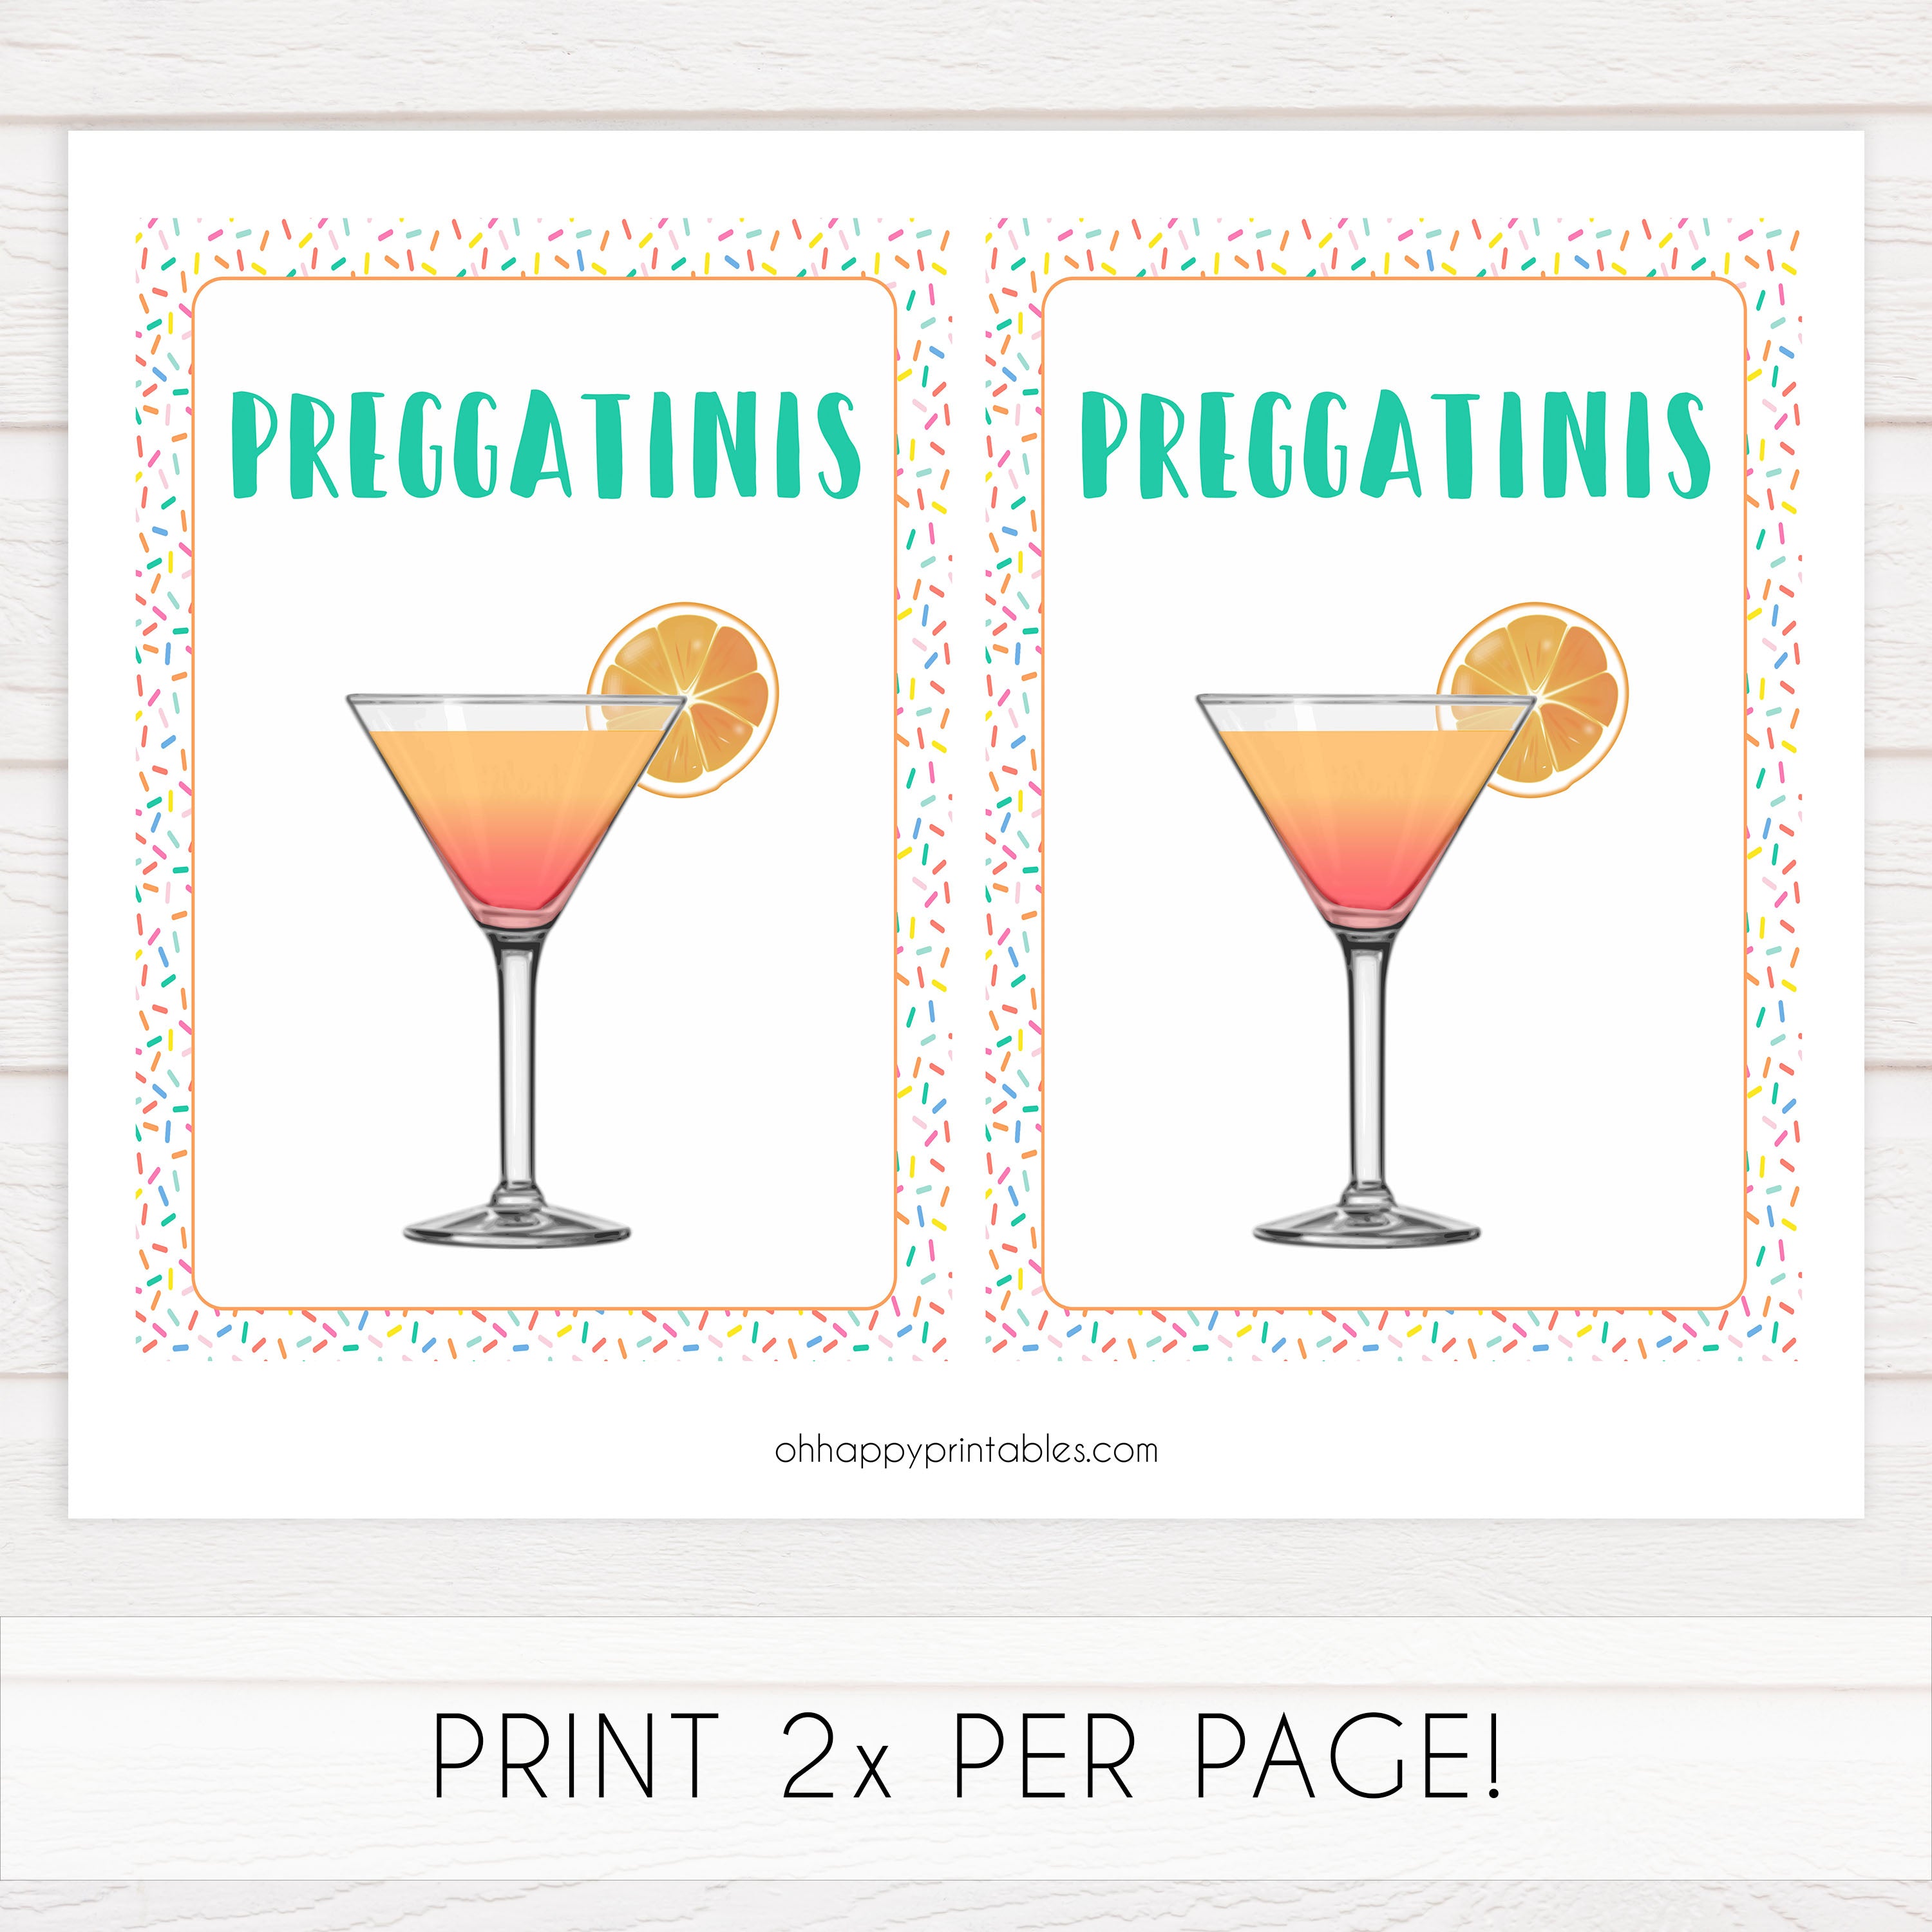 preggatinis baby table signs, Baby sprinkle baby decor, printable baby table signs, printable baby decor, baby sprinkle table signs, fun baby signs, baby sprinkle fun baby table signs